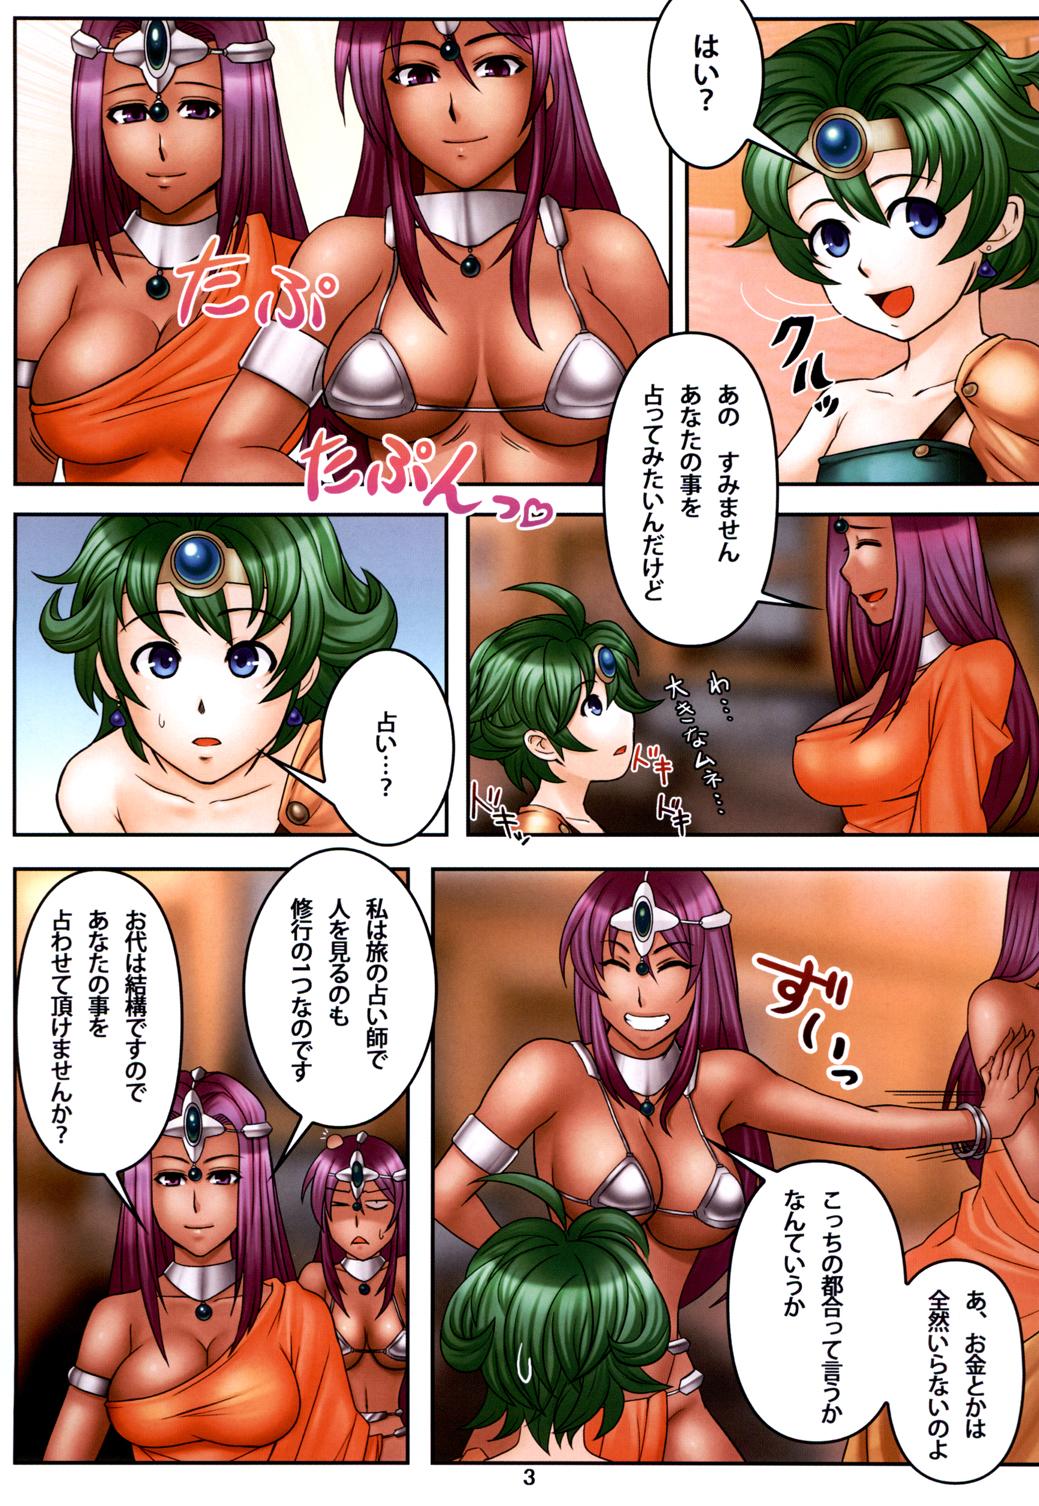 Exotic Muchimuchi Dream 3 - Dragon quest iv Realitykings - Page 4